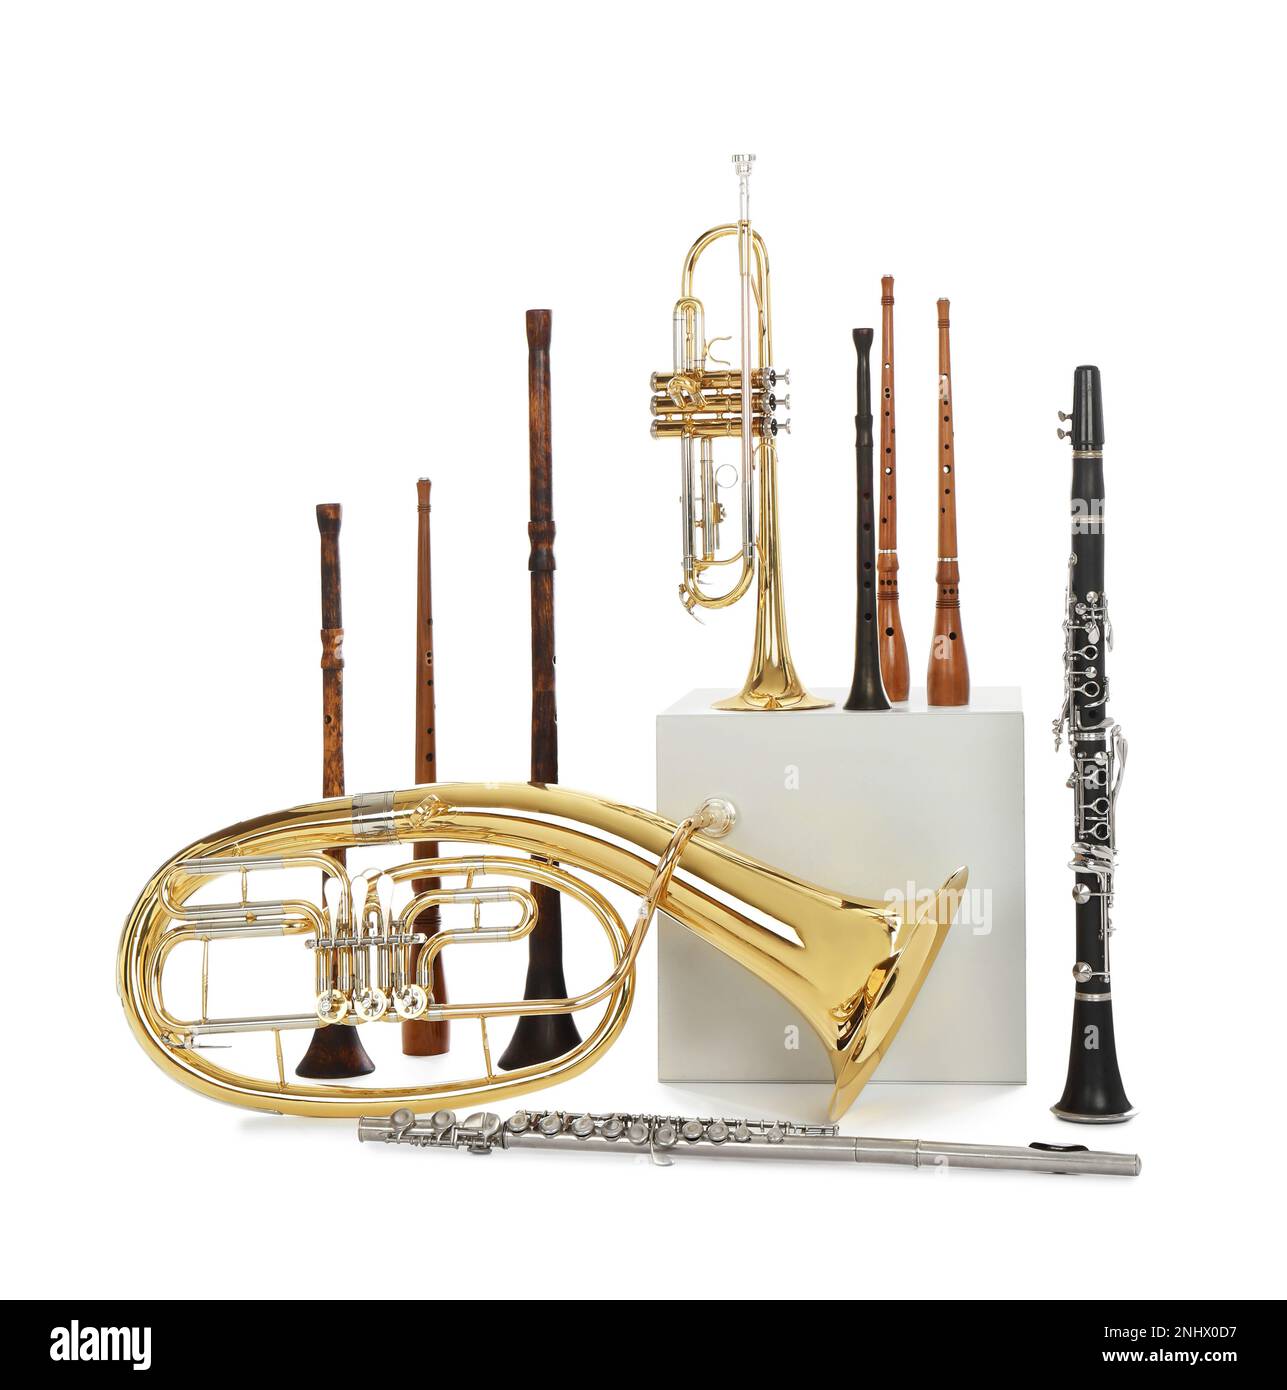 Set of wind musical instruments on white background Stock Photo